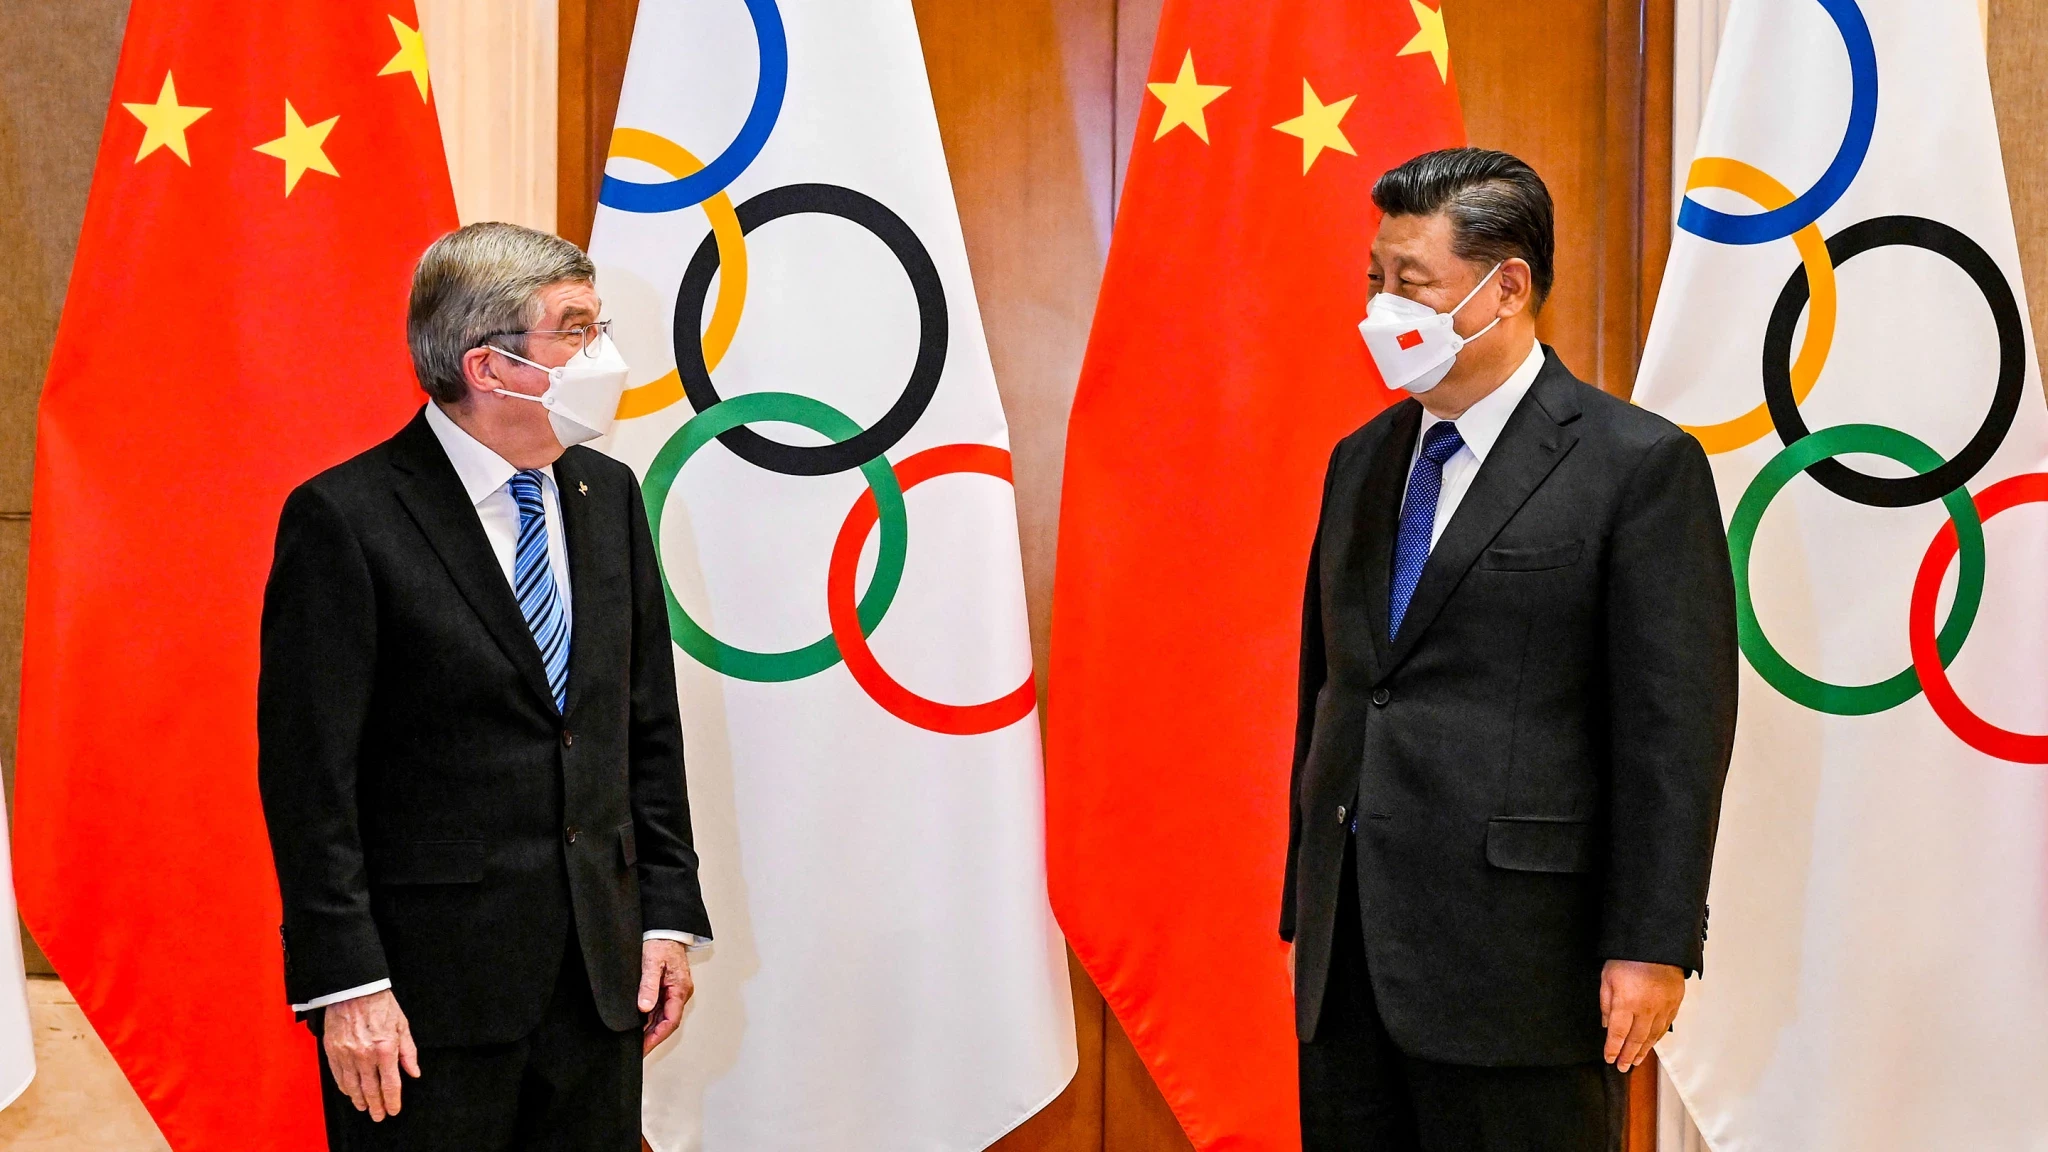 Thomas Bach is the first foreign dignitary that Chinese President Xi Jinping has met face-to-face since the COVID-19 pandemic started nearly two years ago ©Ministry of Foreign Affairs